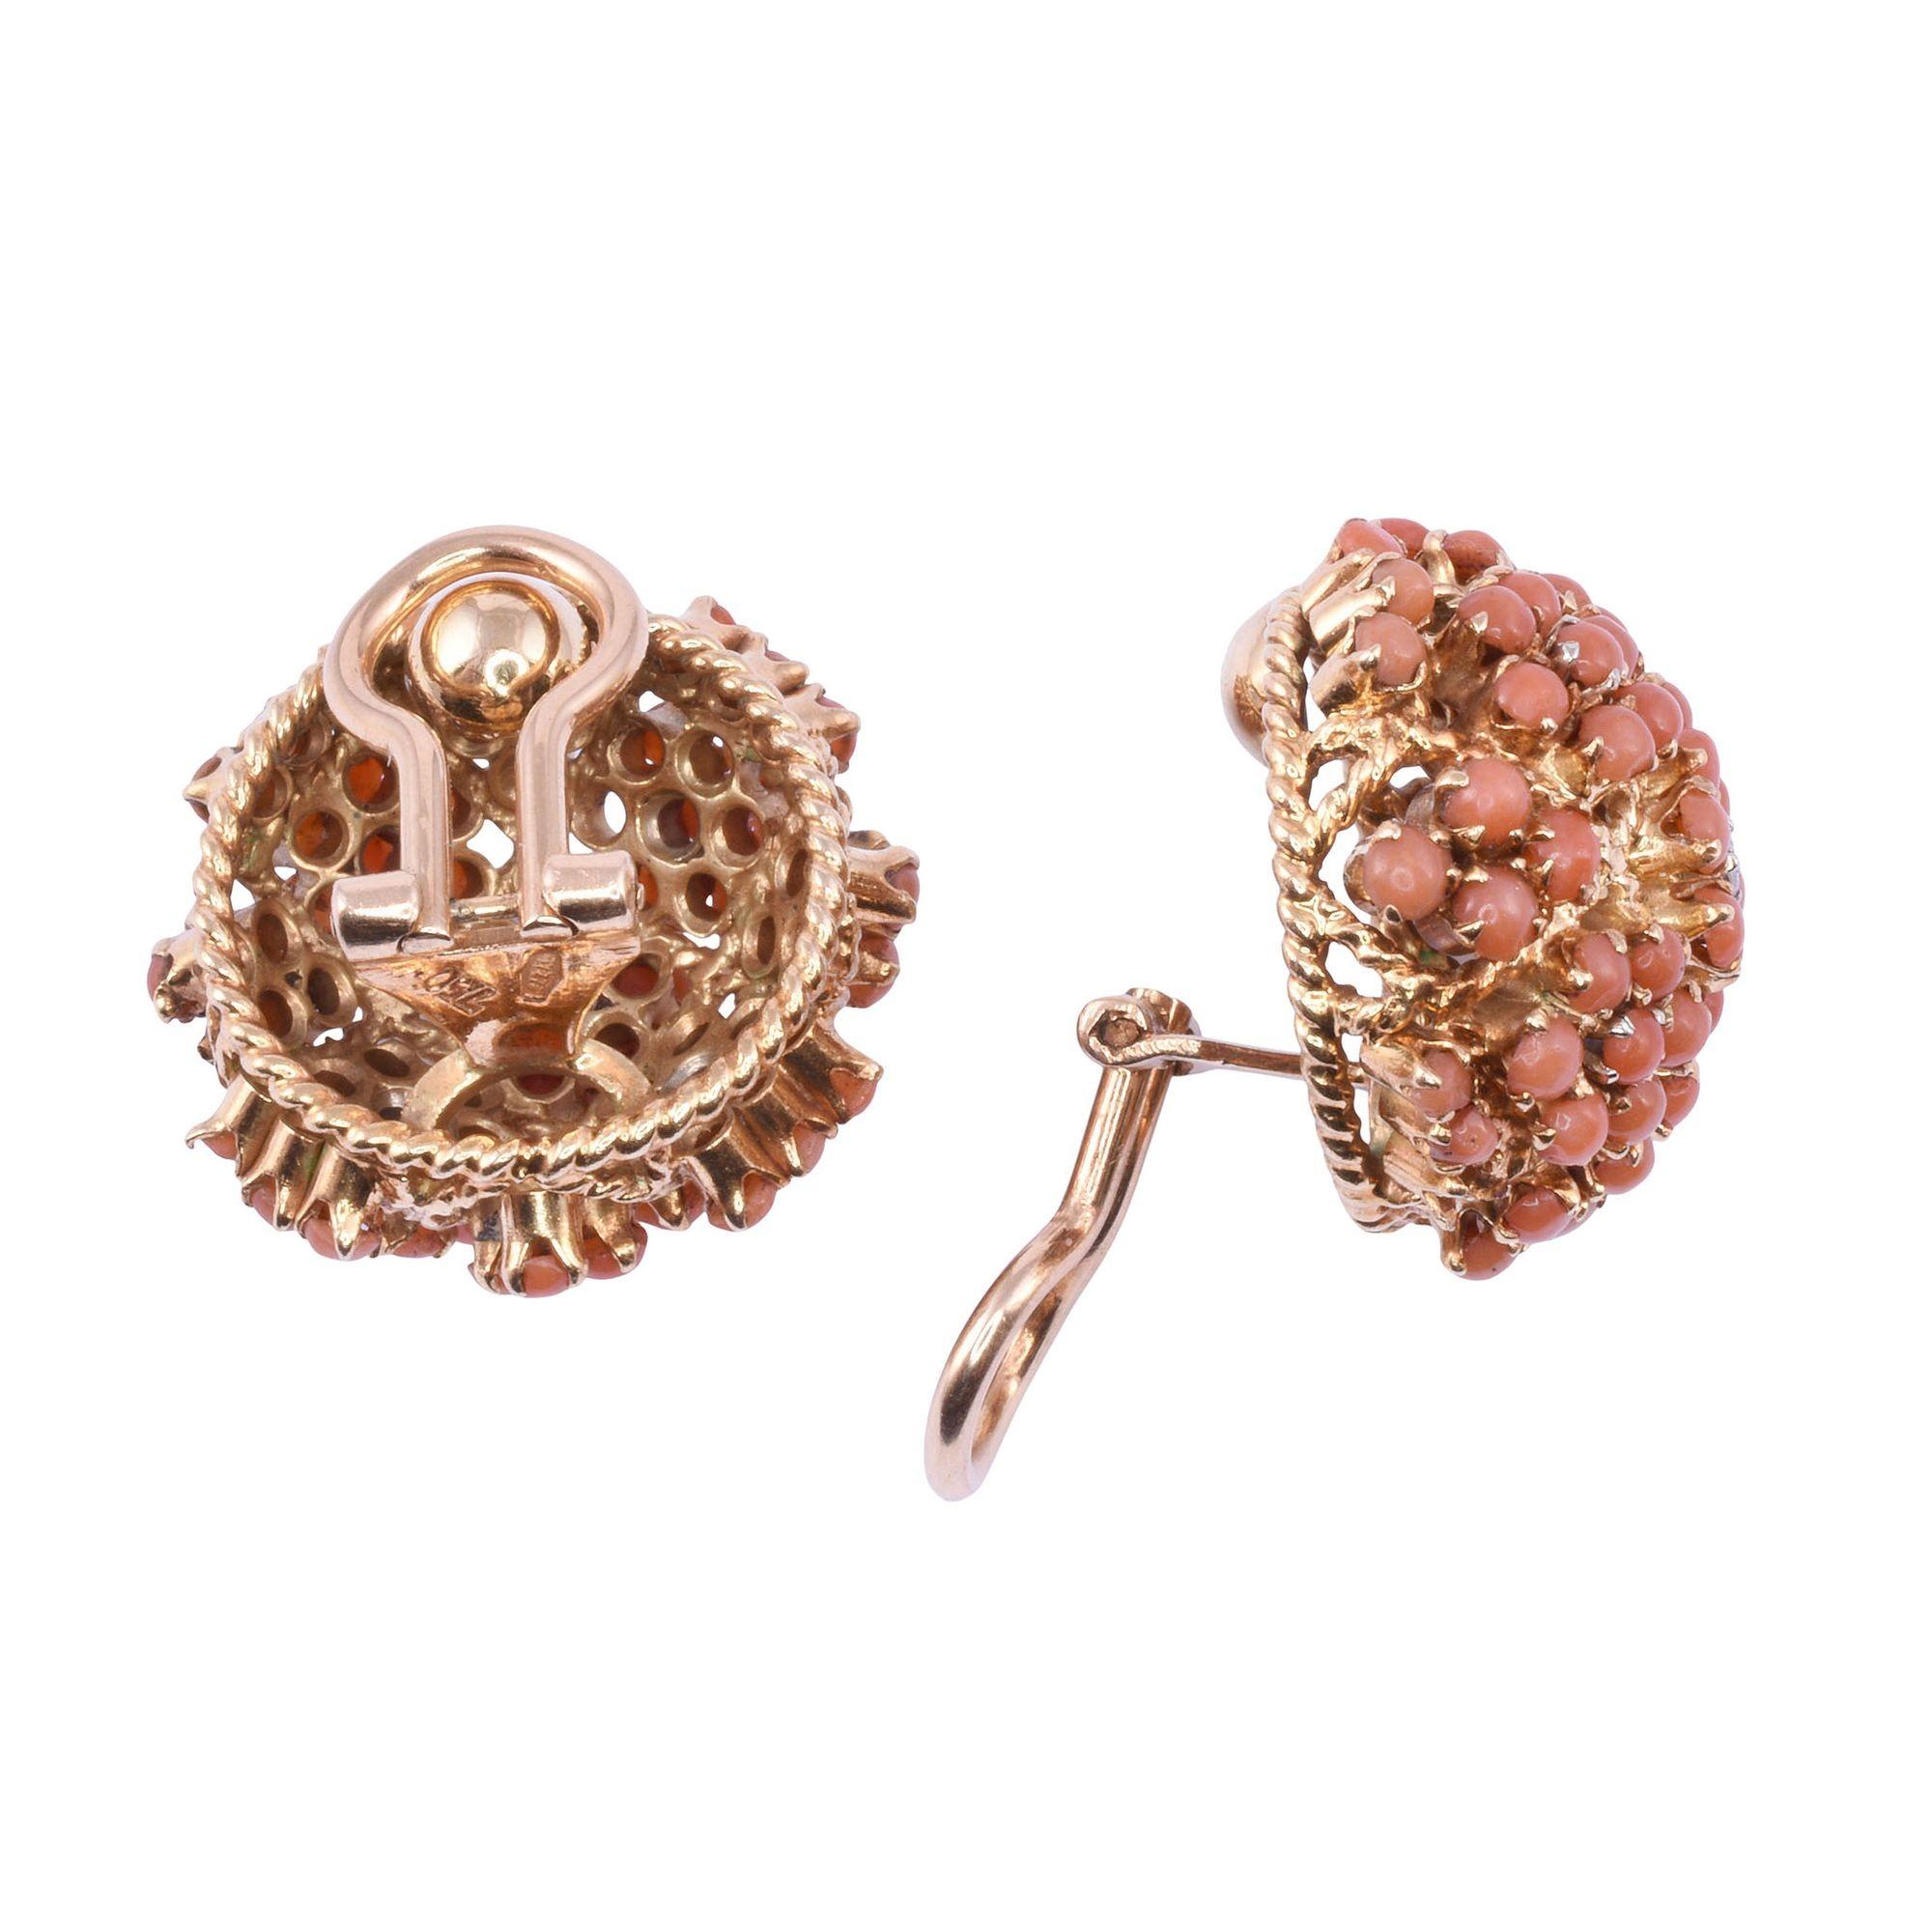 Vintage Italian coral dome 18K clip earrings, circa 1960. These 18 karat gold clip earrings feature a dome of prong set coral accented with two diamonds at .07 carat total weight. The diamonds have VS1 clarity and G-H color. [KIMH 558]
